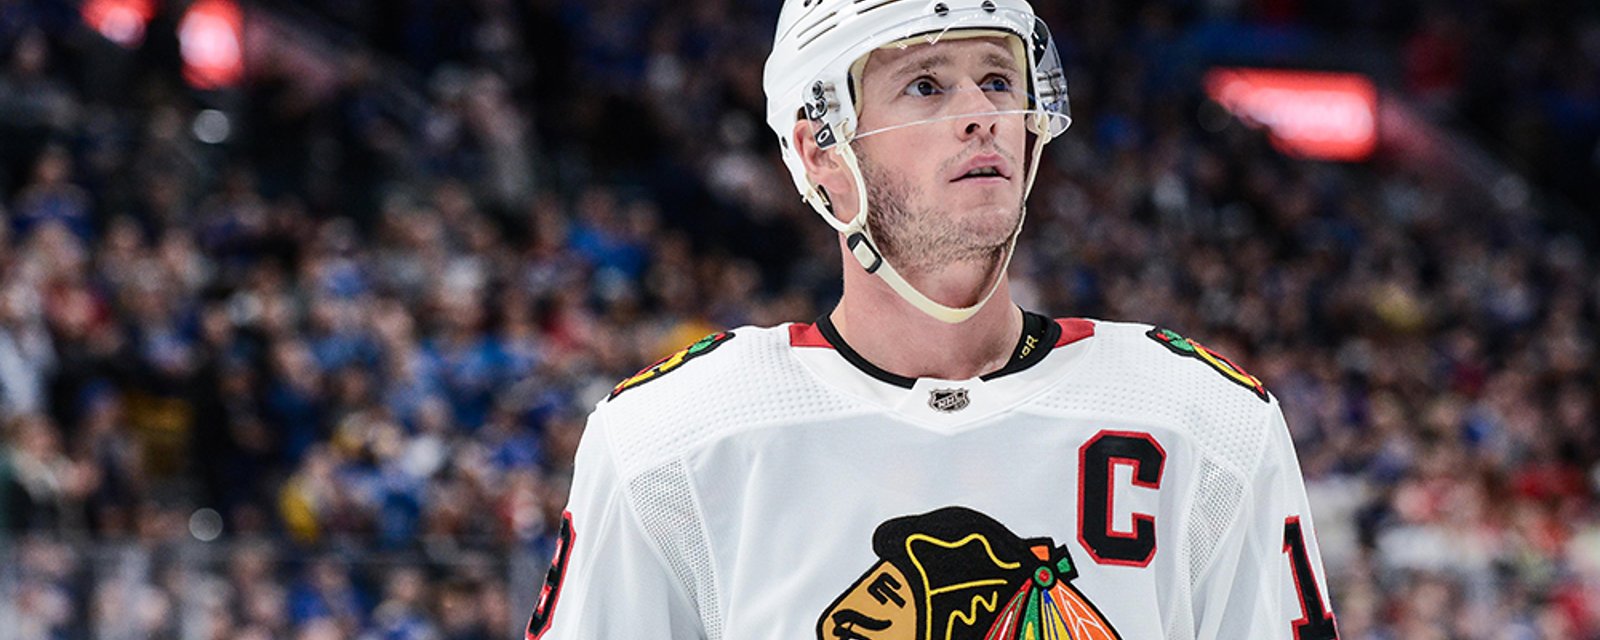 Toews steps up big time to support Chicago families affected by COVID-19